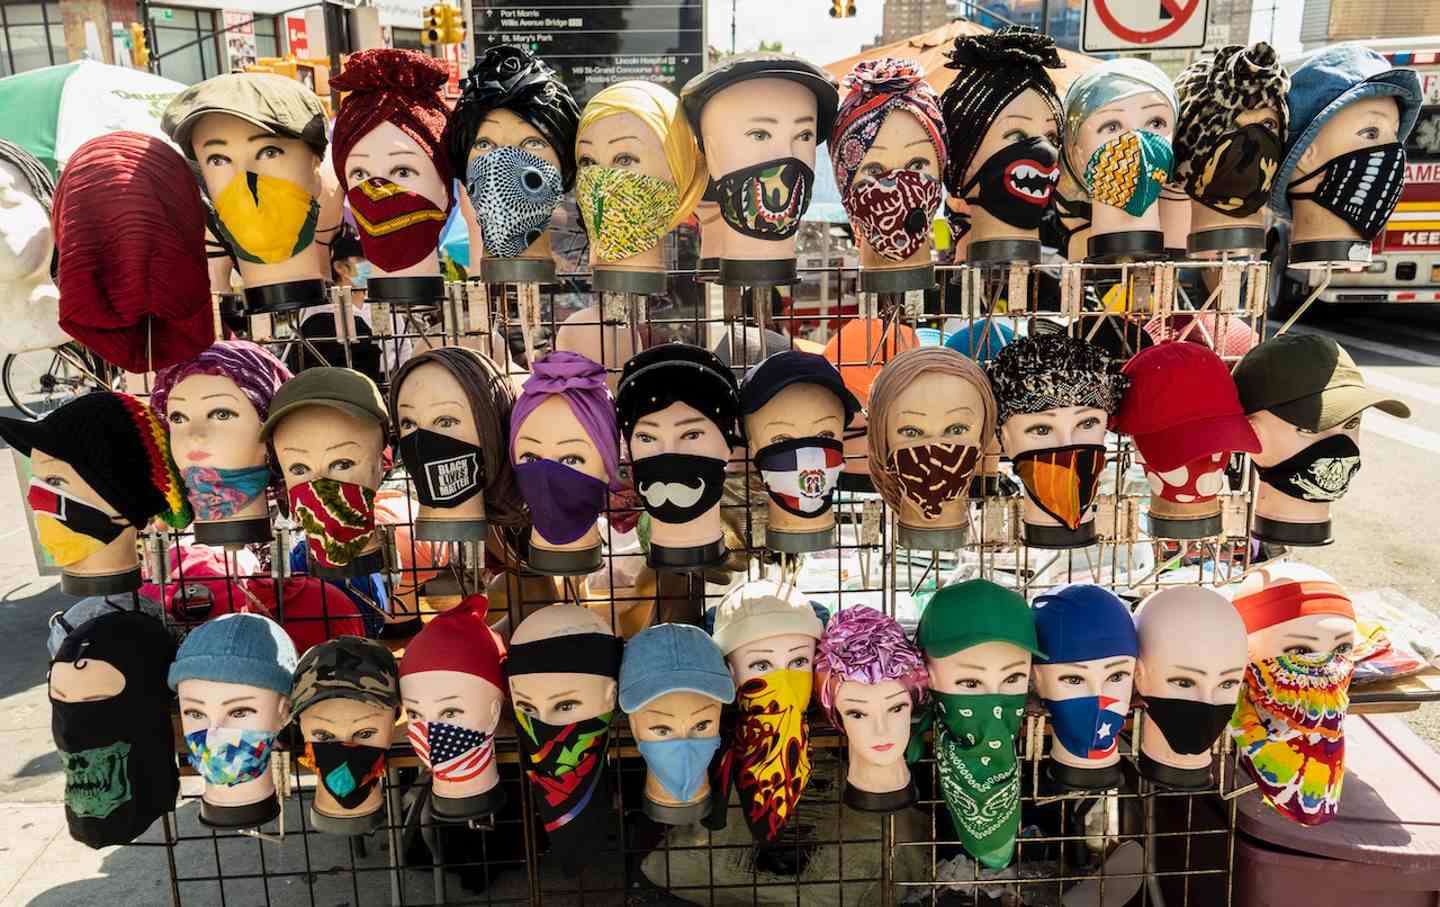 A street stall displays cloth masks on mannequin heads.